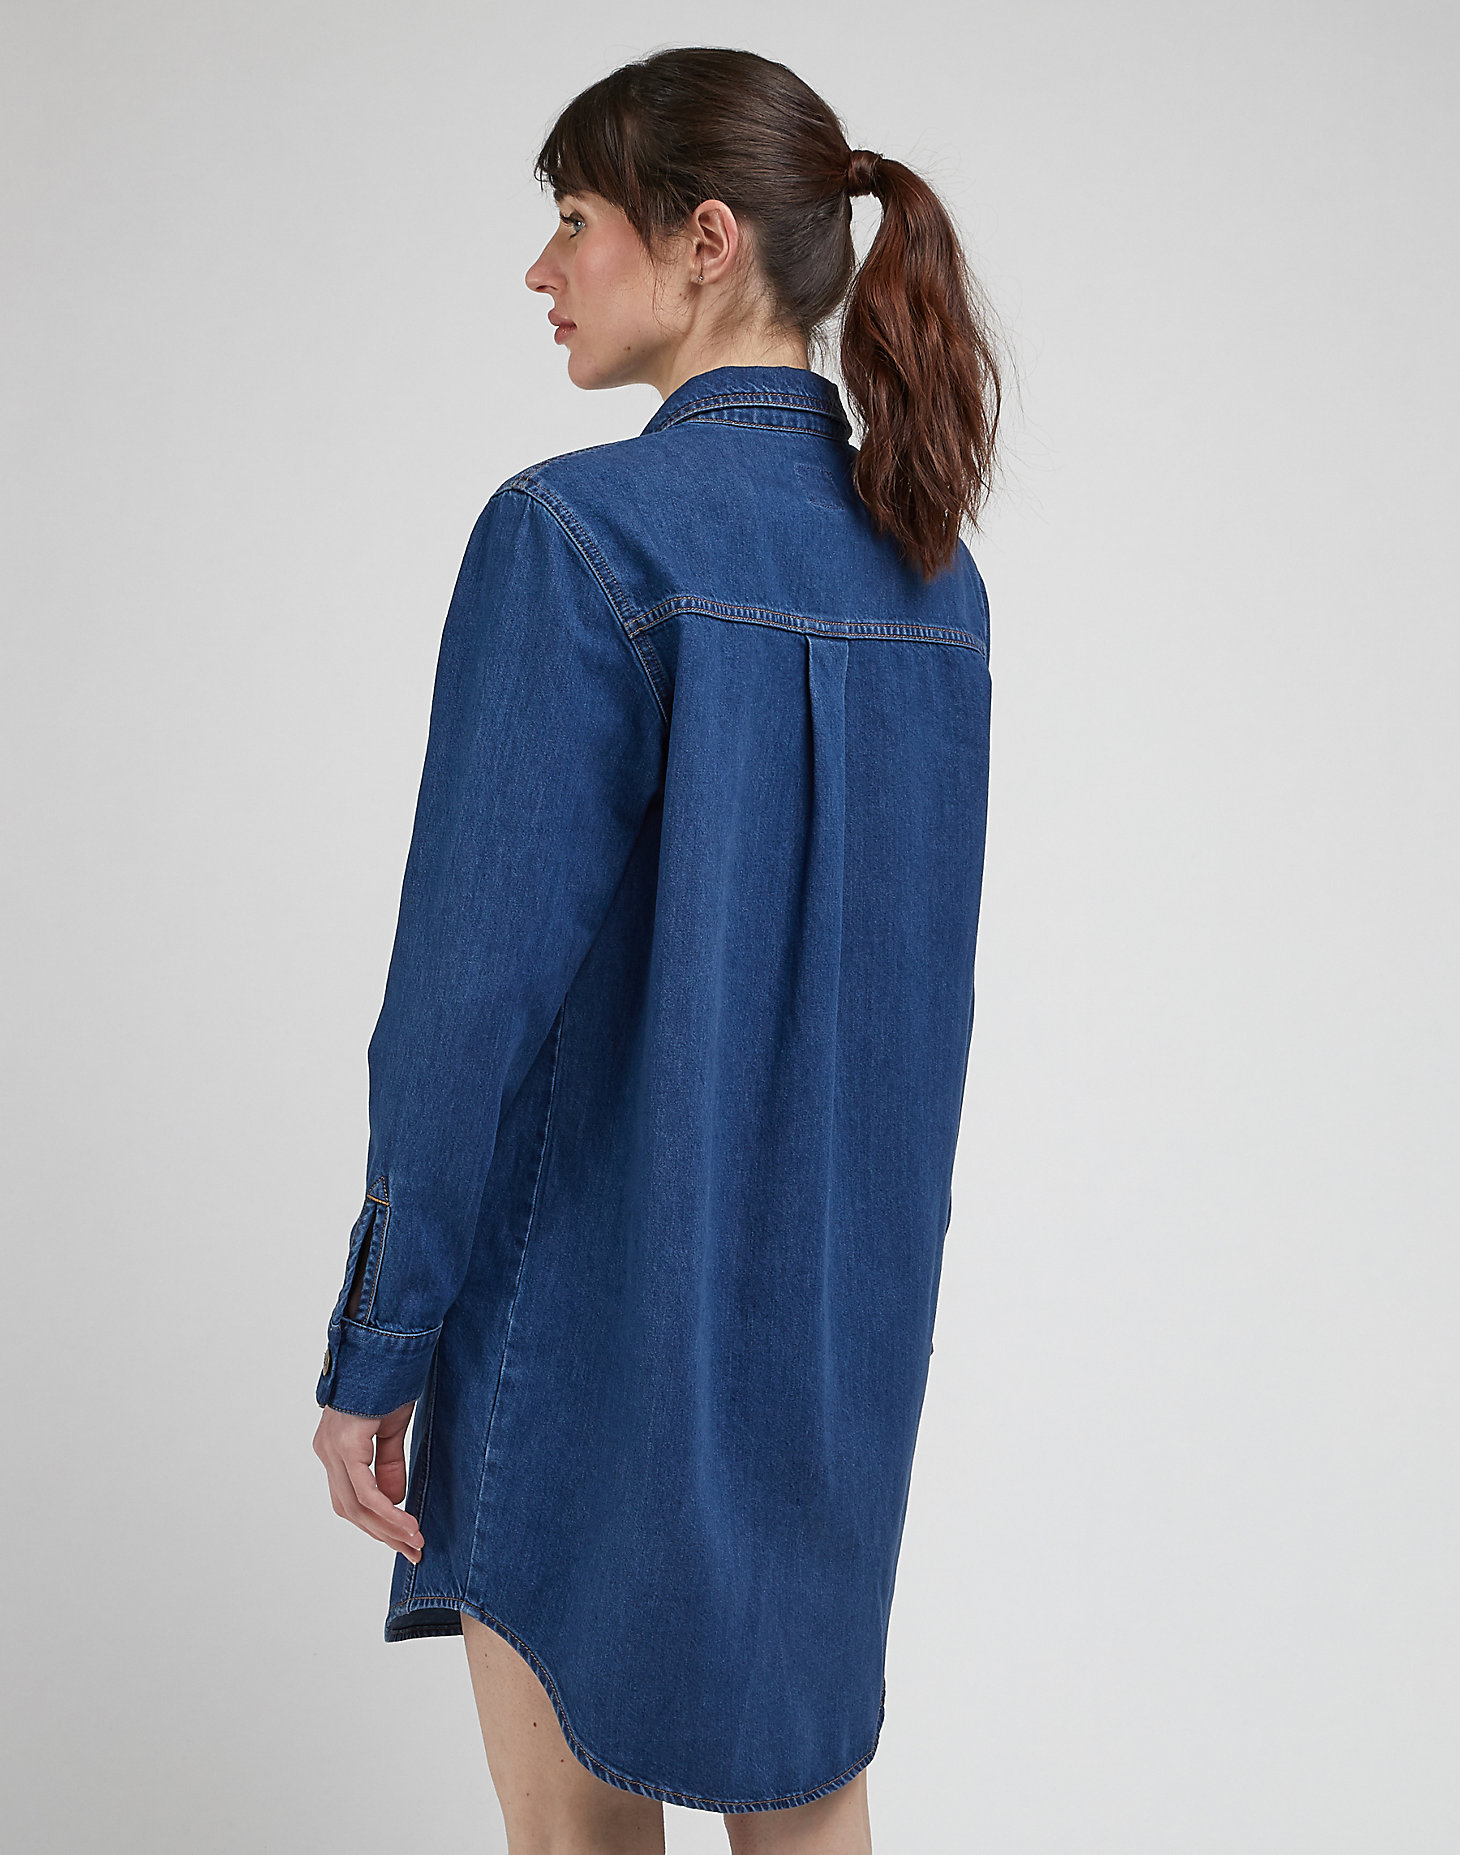 Unionall Shirt Dress in Into The Moon alternative view 1